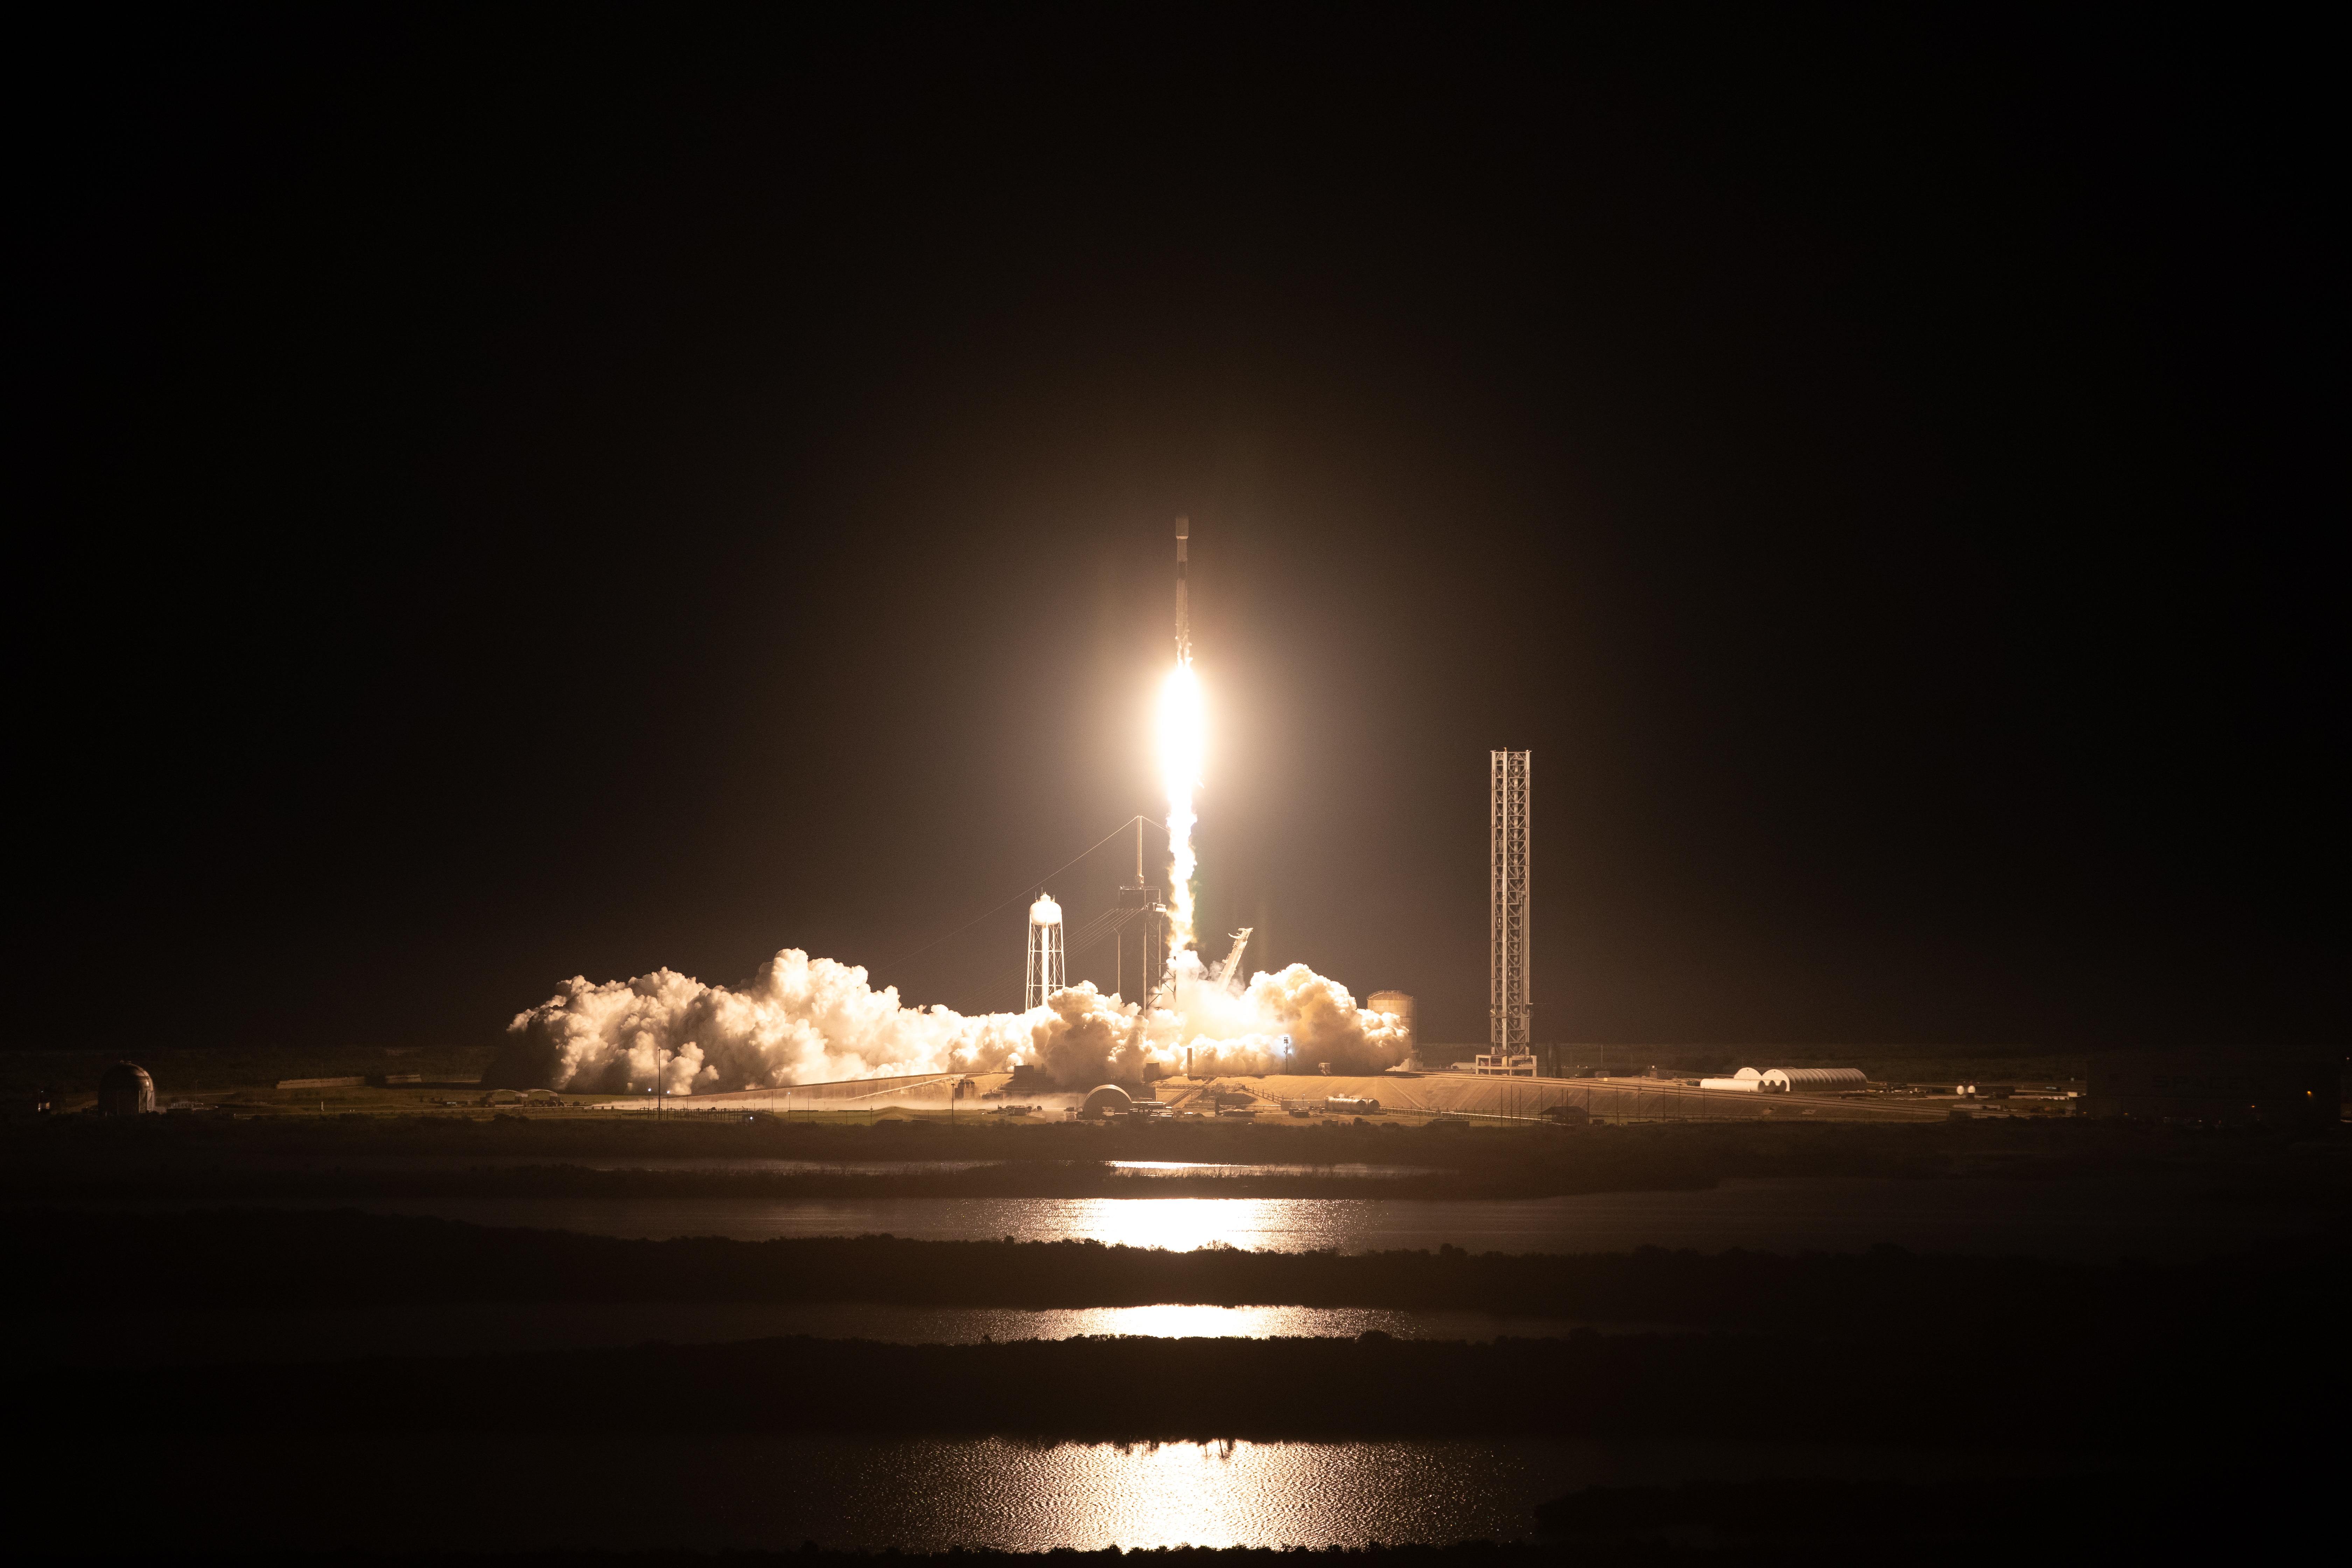 A SpaceX Falcon 9 rocket carrying the Intuitive Machines Nova-C lander takes off from the launch pad at night. The flames coming from the bottom of the rocket (the bright spot at center) light up the surrounding area, illuminating clouds of white vapor that spread outward along the ground. The light also reflects off water in the foreground. Credit: NASA/Kim Shiflett